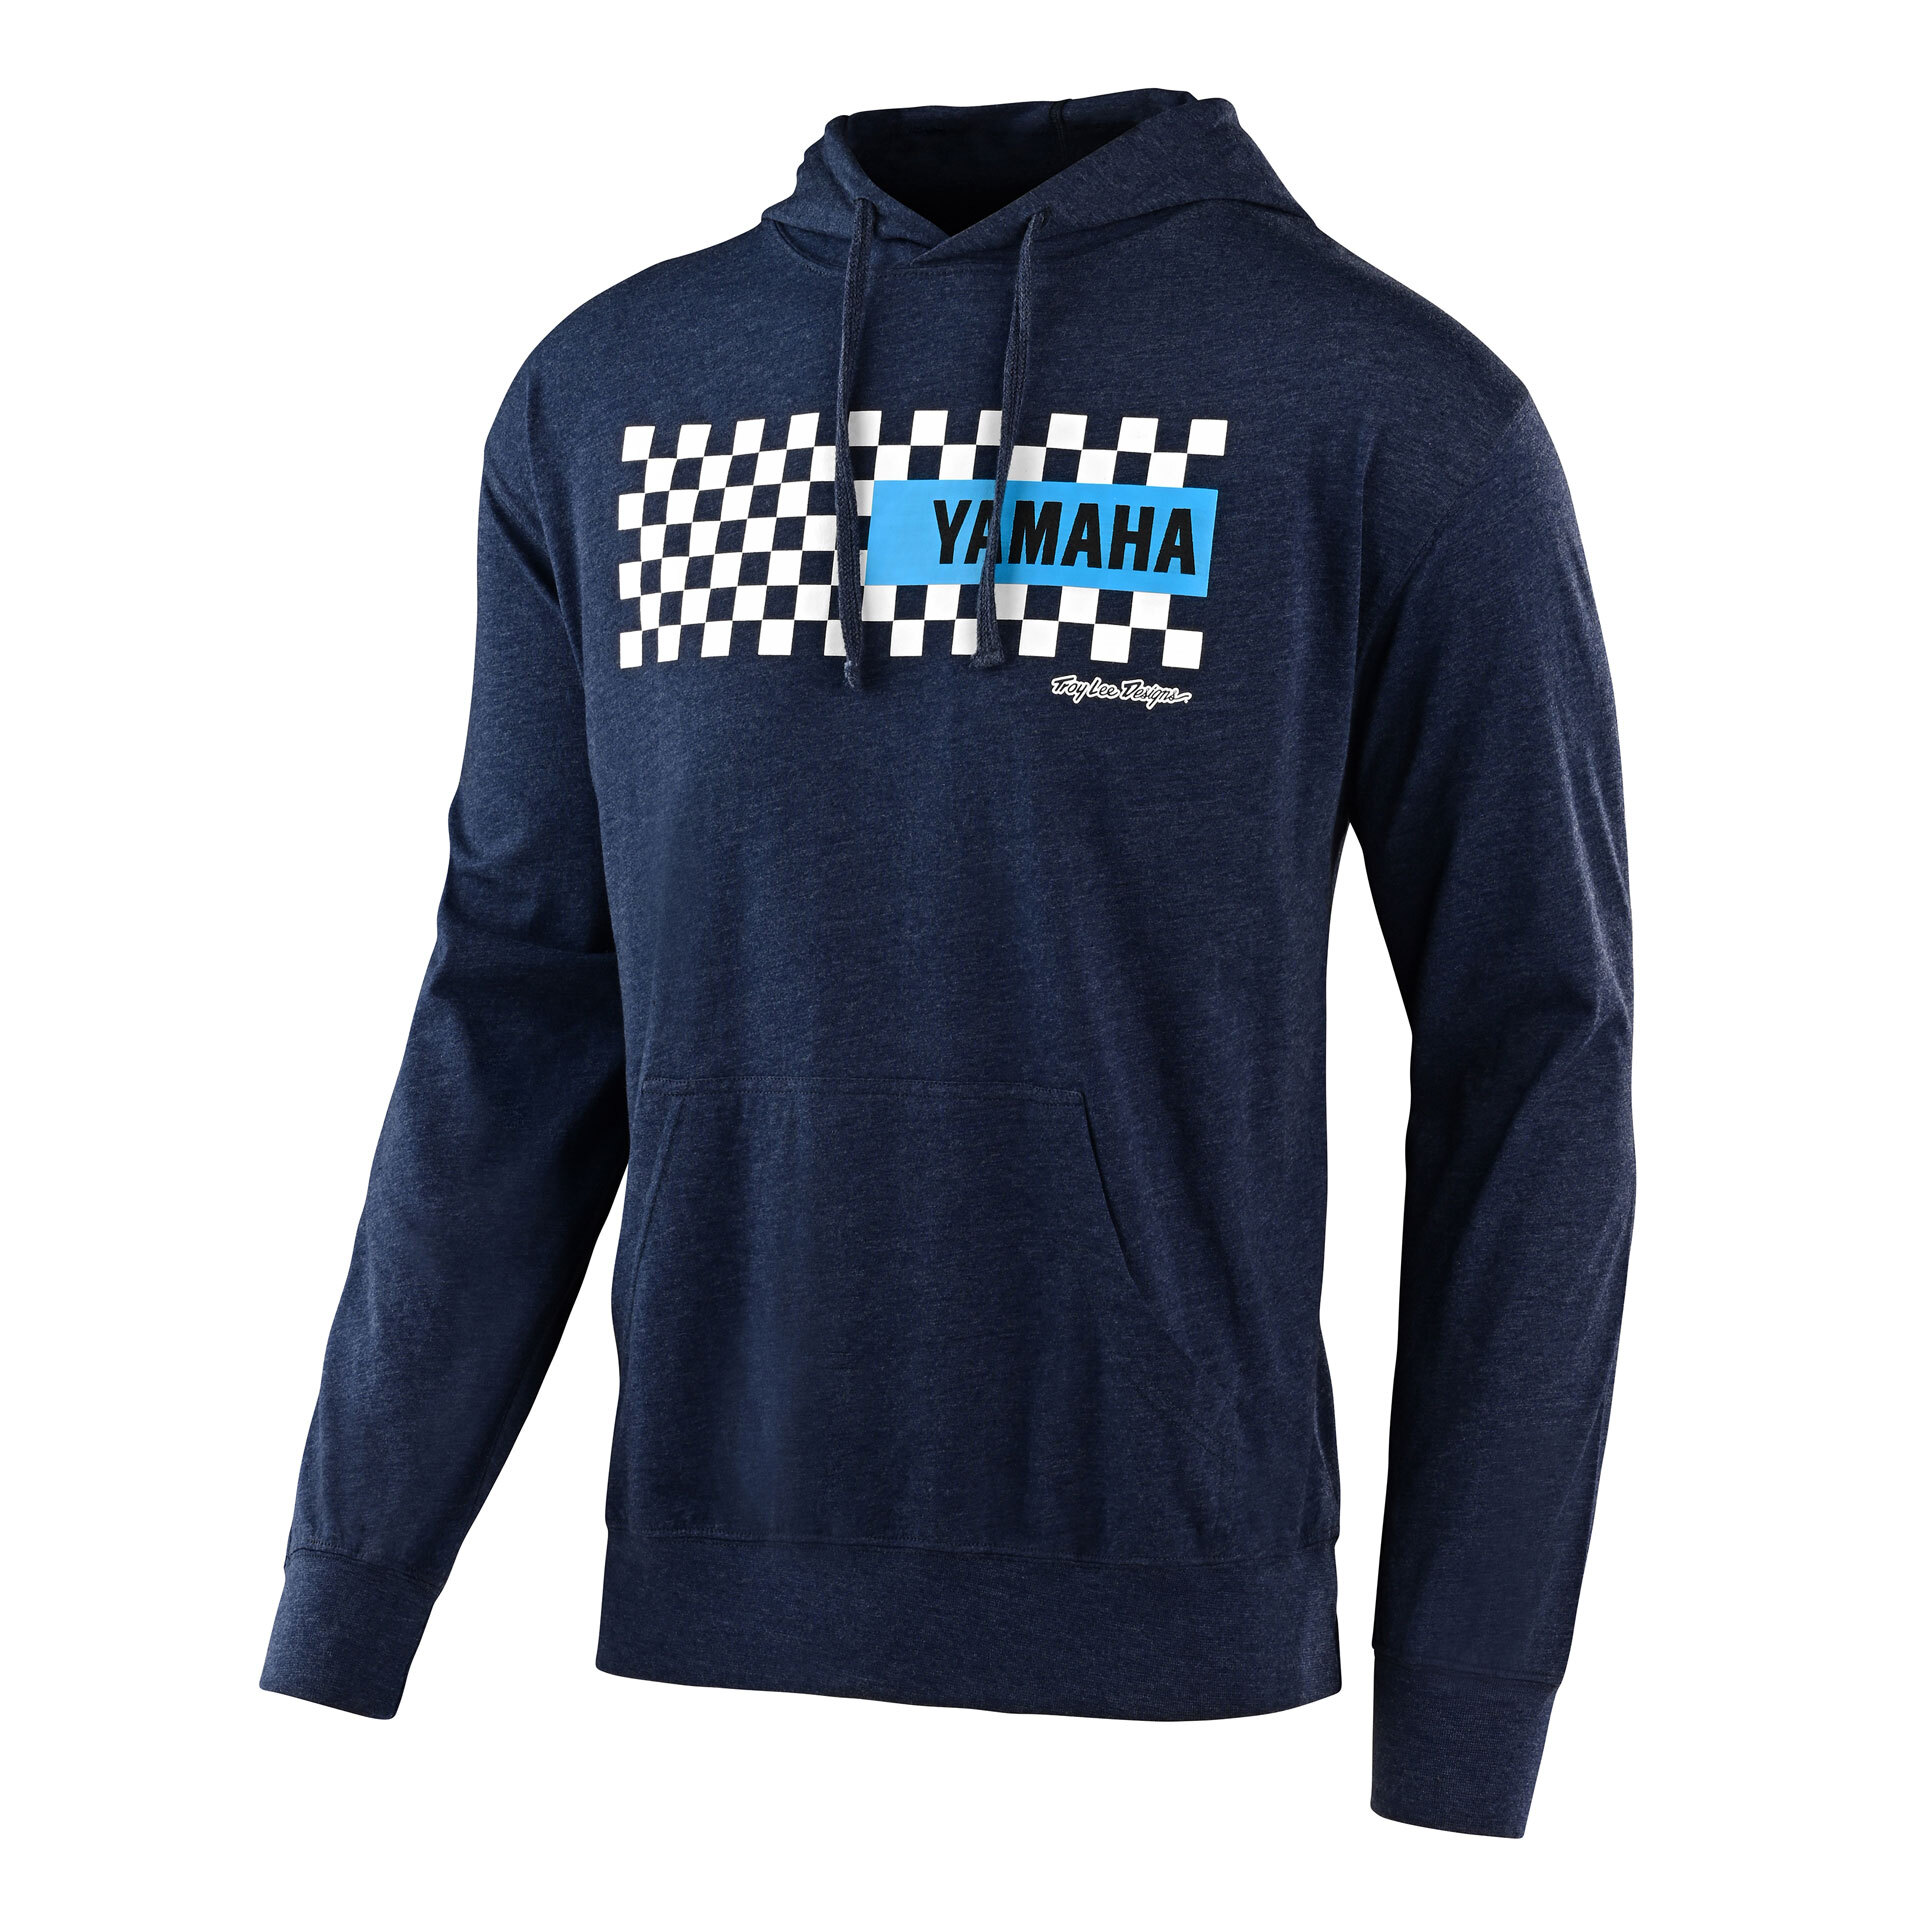 Yamaha Checkers Lightweight Hoodie by Troy Lee Designs® Small navy blue